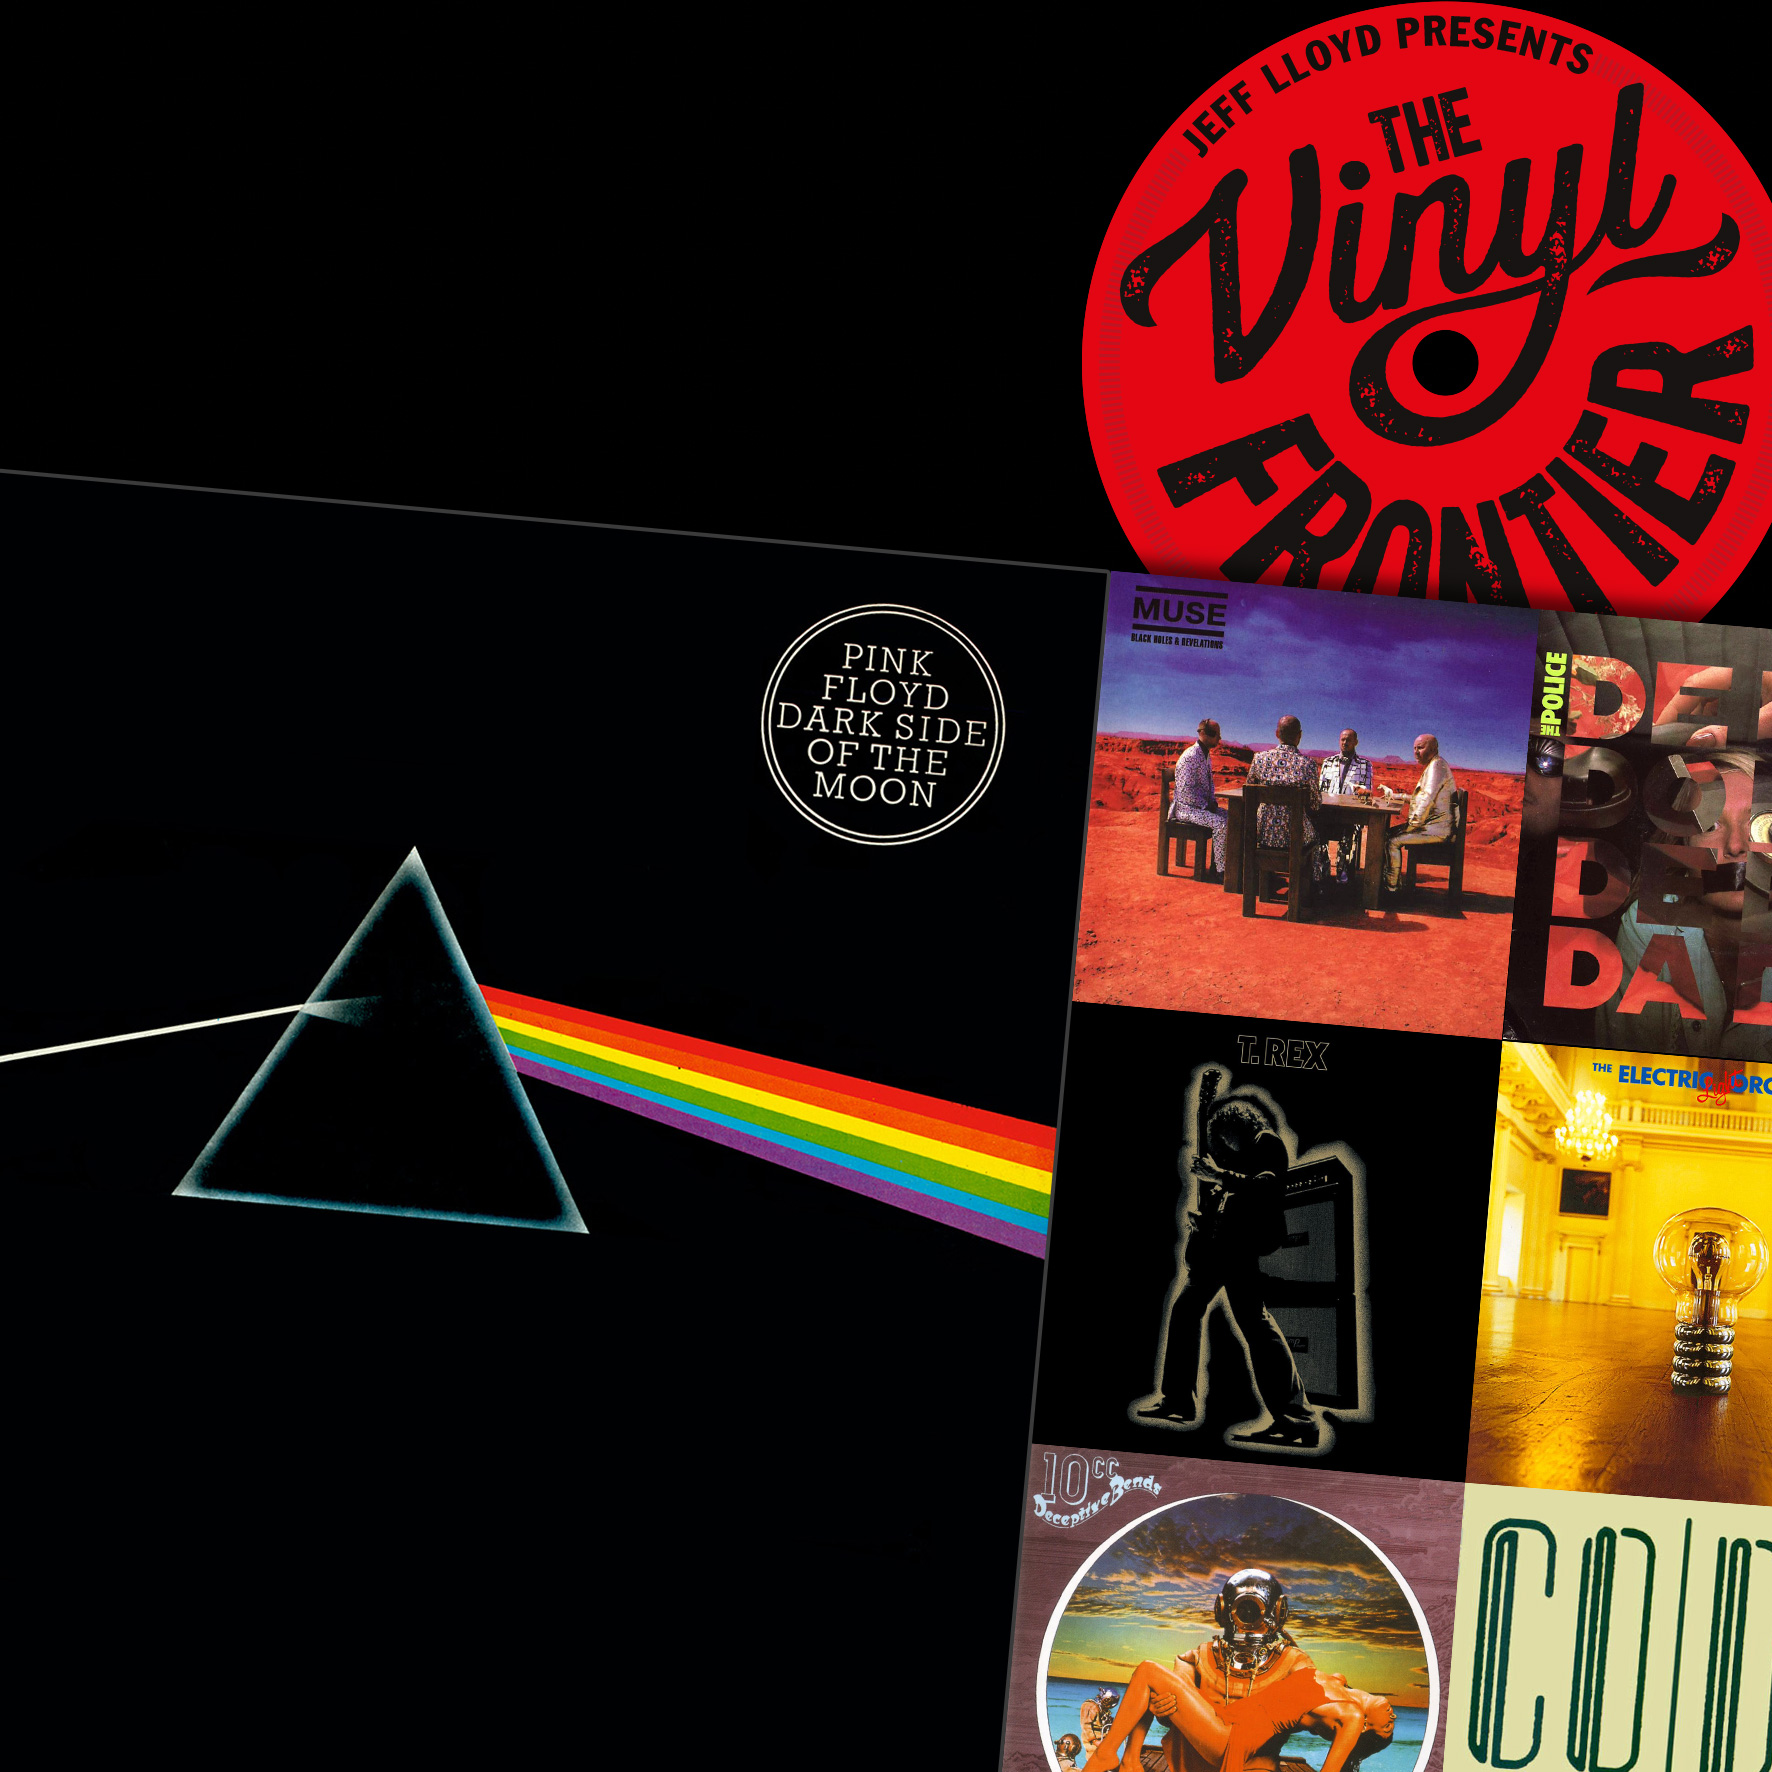 Pink Floyd Graphic Designer On 'The Dark Side Of The Moon' Cover